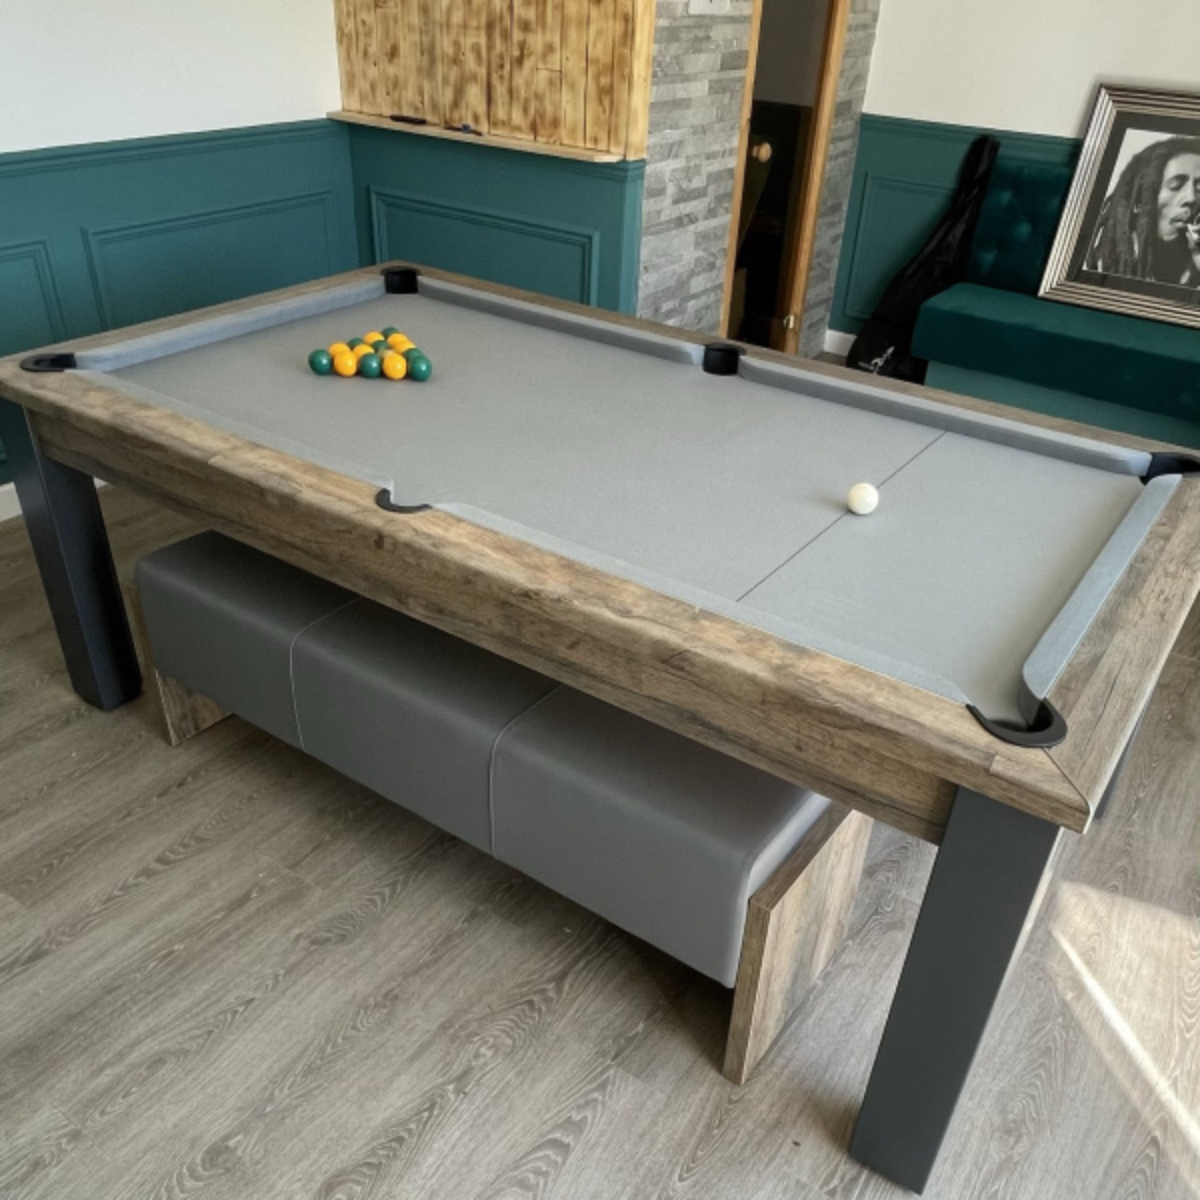 The Elixir 6ft & 7ft British Pool Table W/Dining Top Distressed Oak